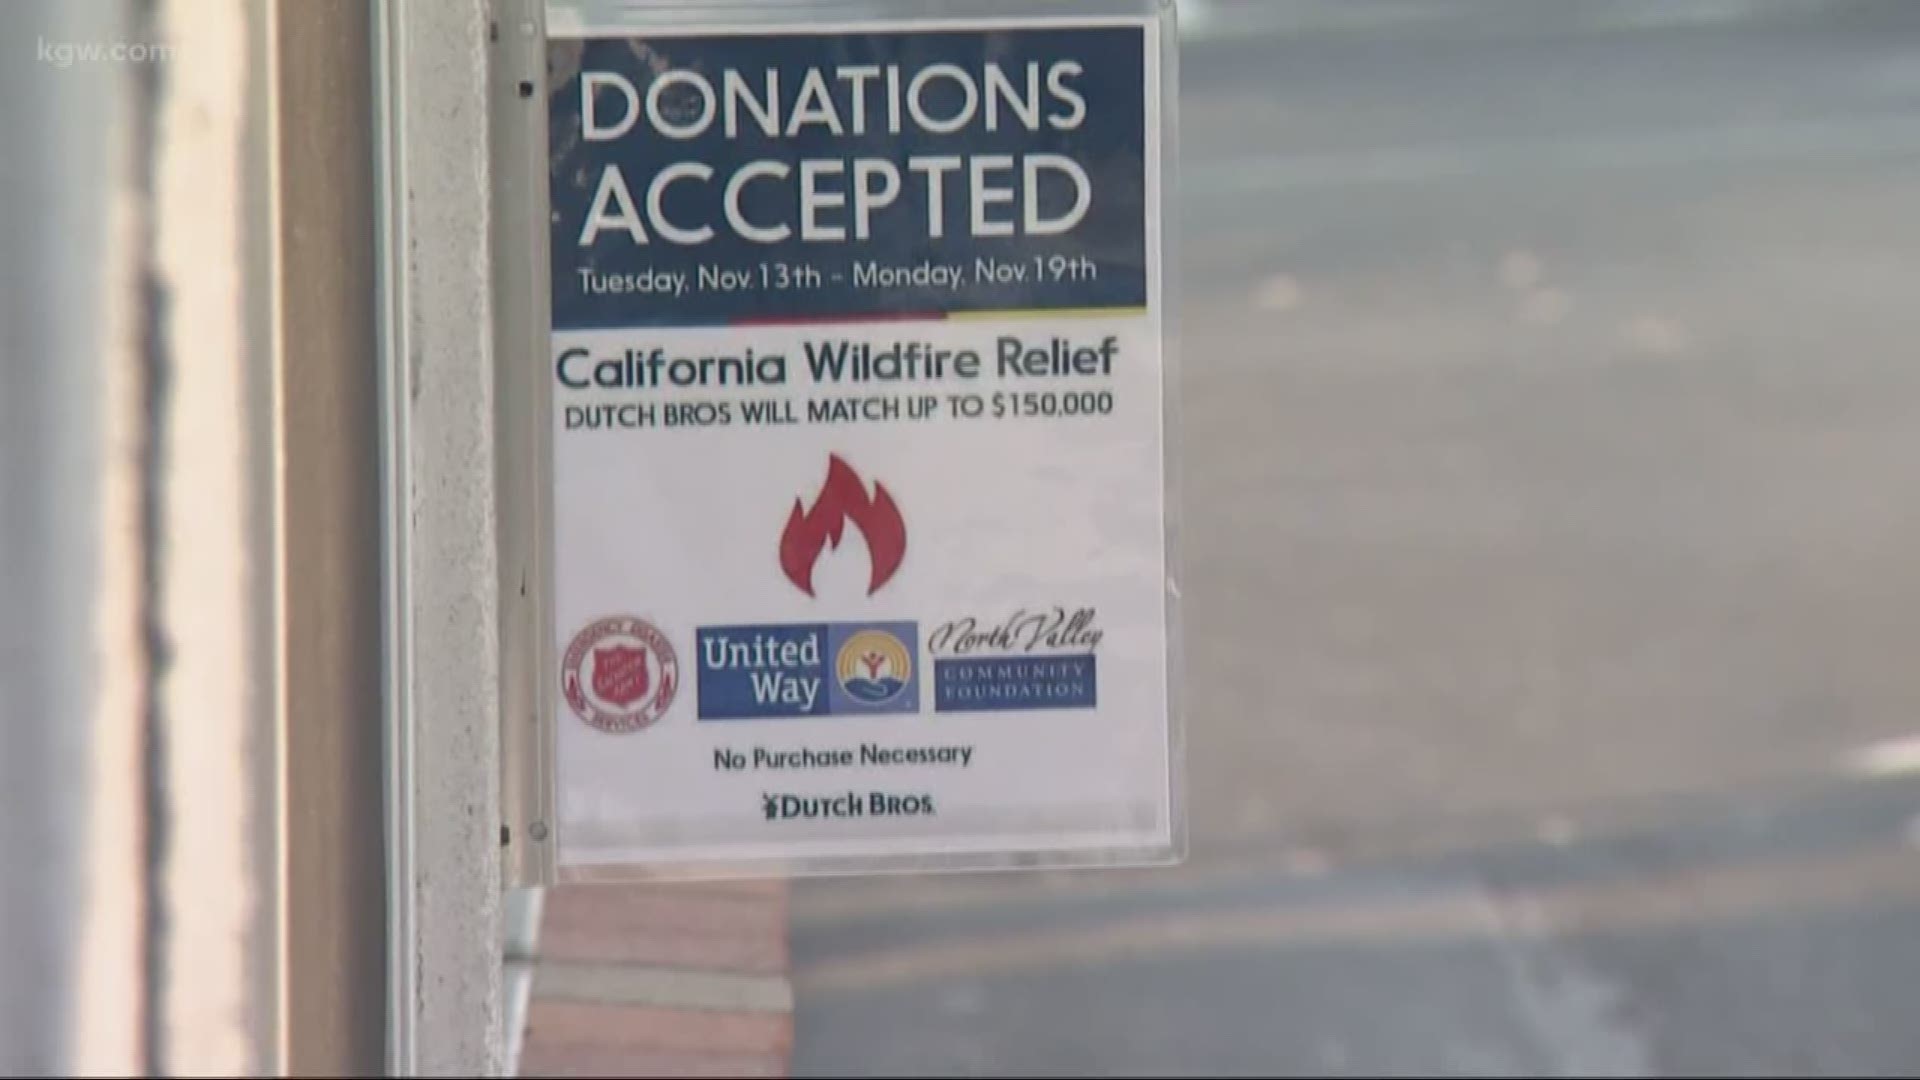 Oregonians are stepping to help victims of the California wildfires, humans and the their four-legged friends.